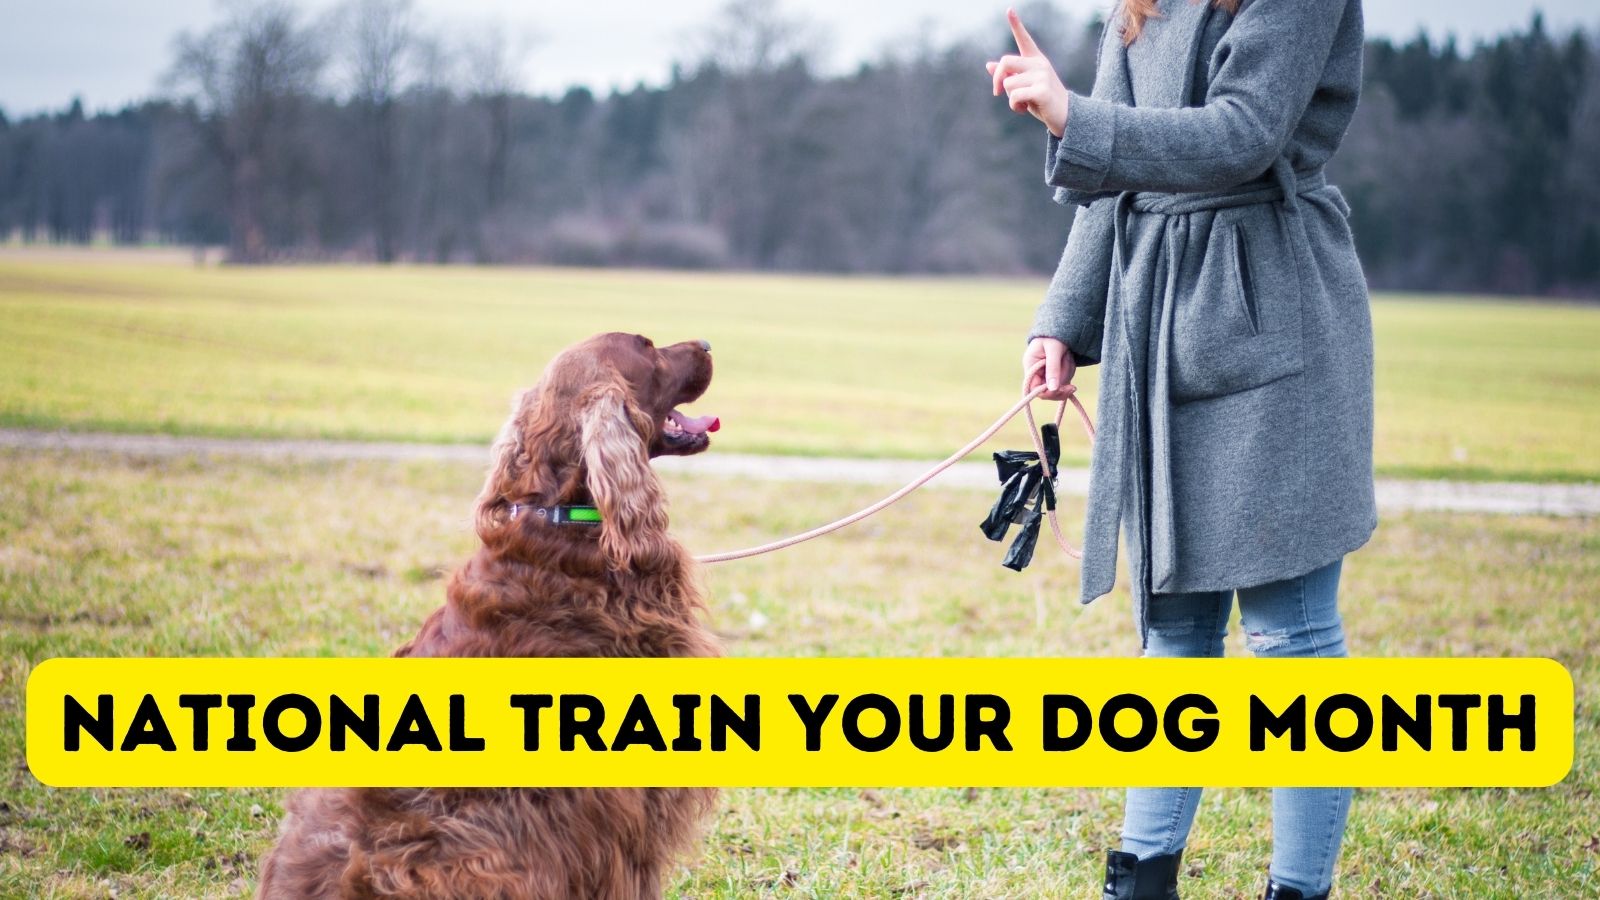 7 Tips for National Train Your Dog Month